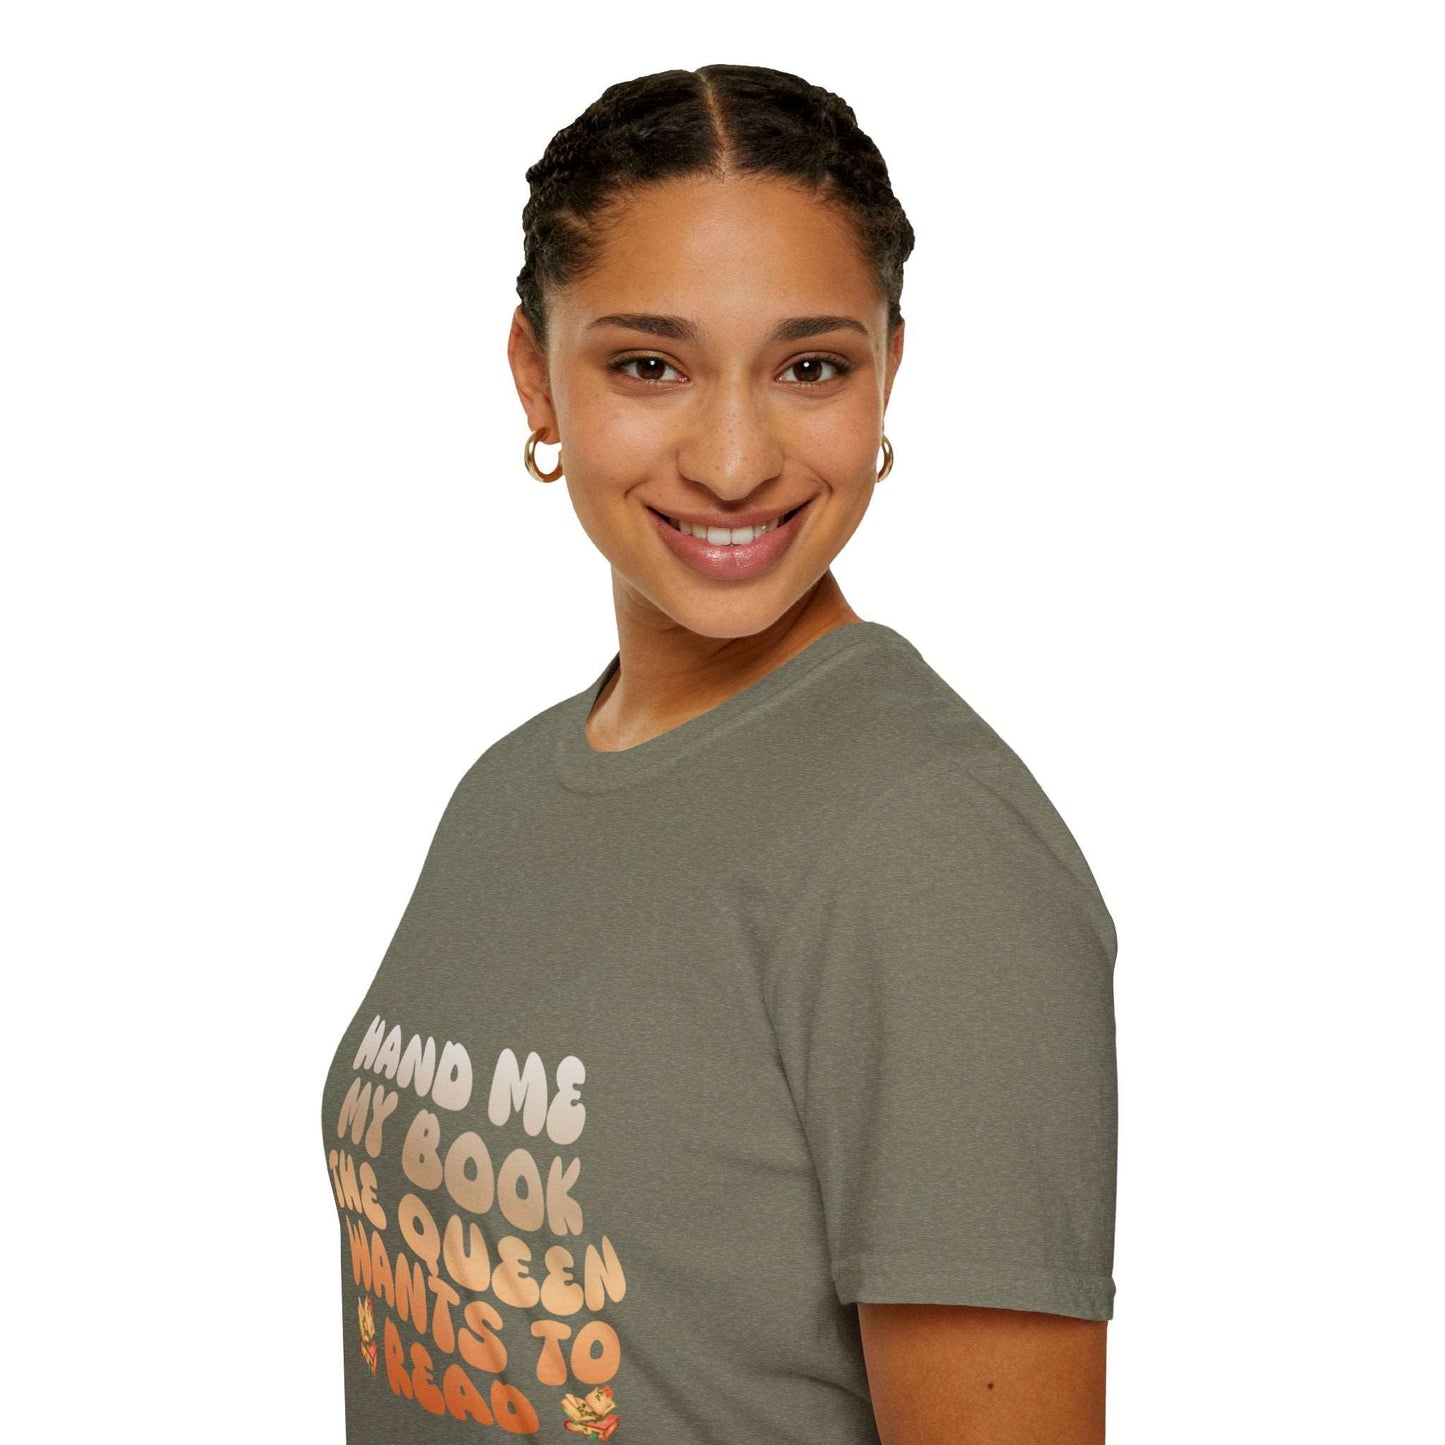 "Give Me My Book The Queen Wants to Read" Unisex Soft style T-Shirt